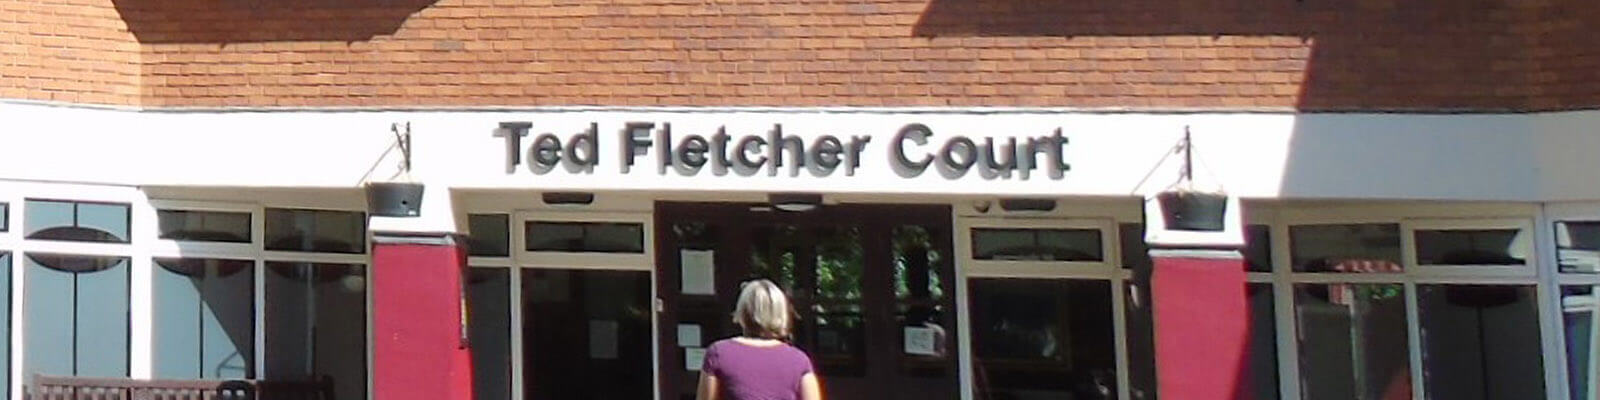 a view from outside the front of Ted Fletcher Court